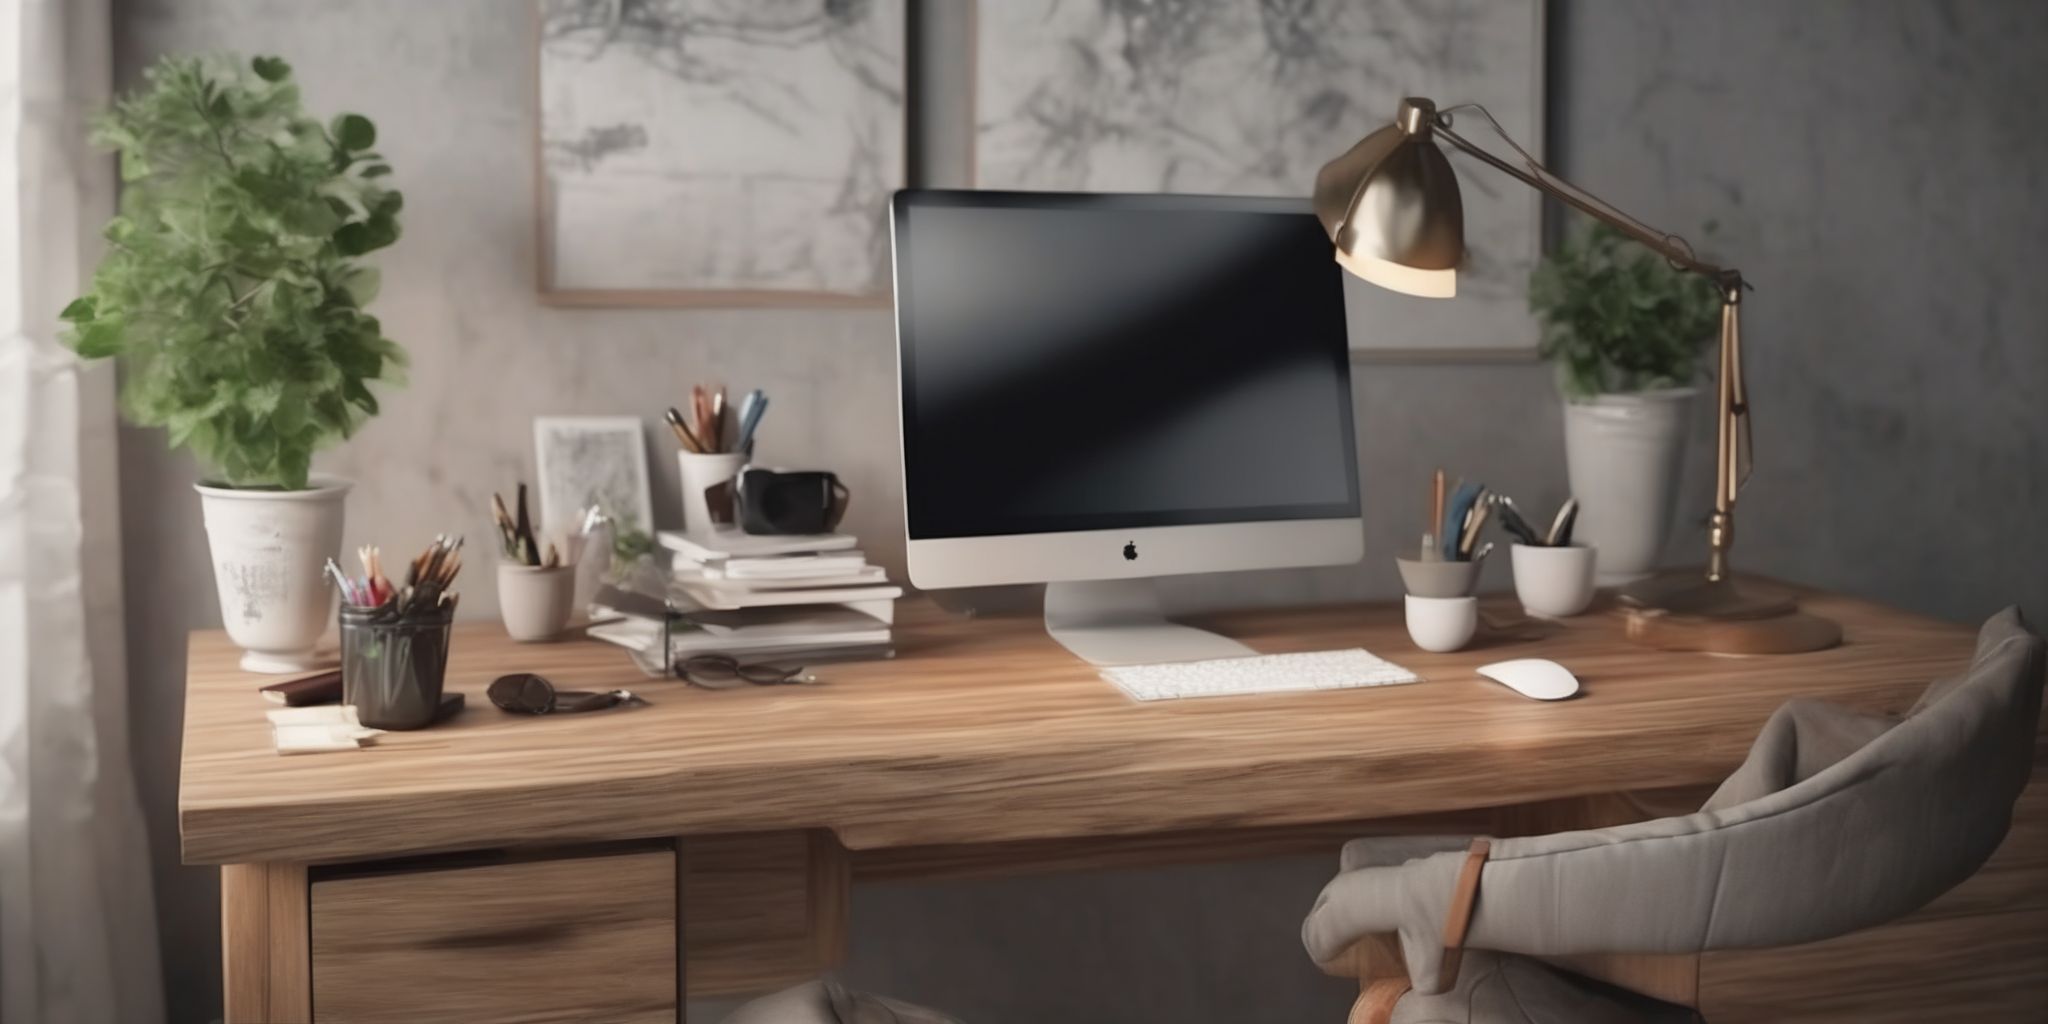 Desk  in realistic, photographic style